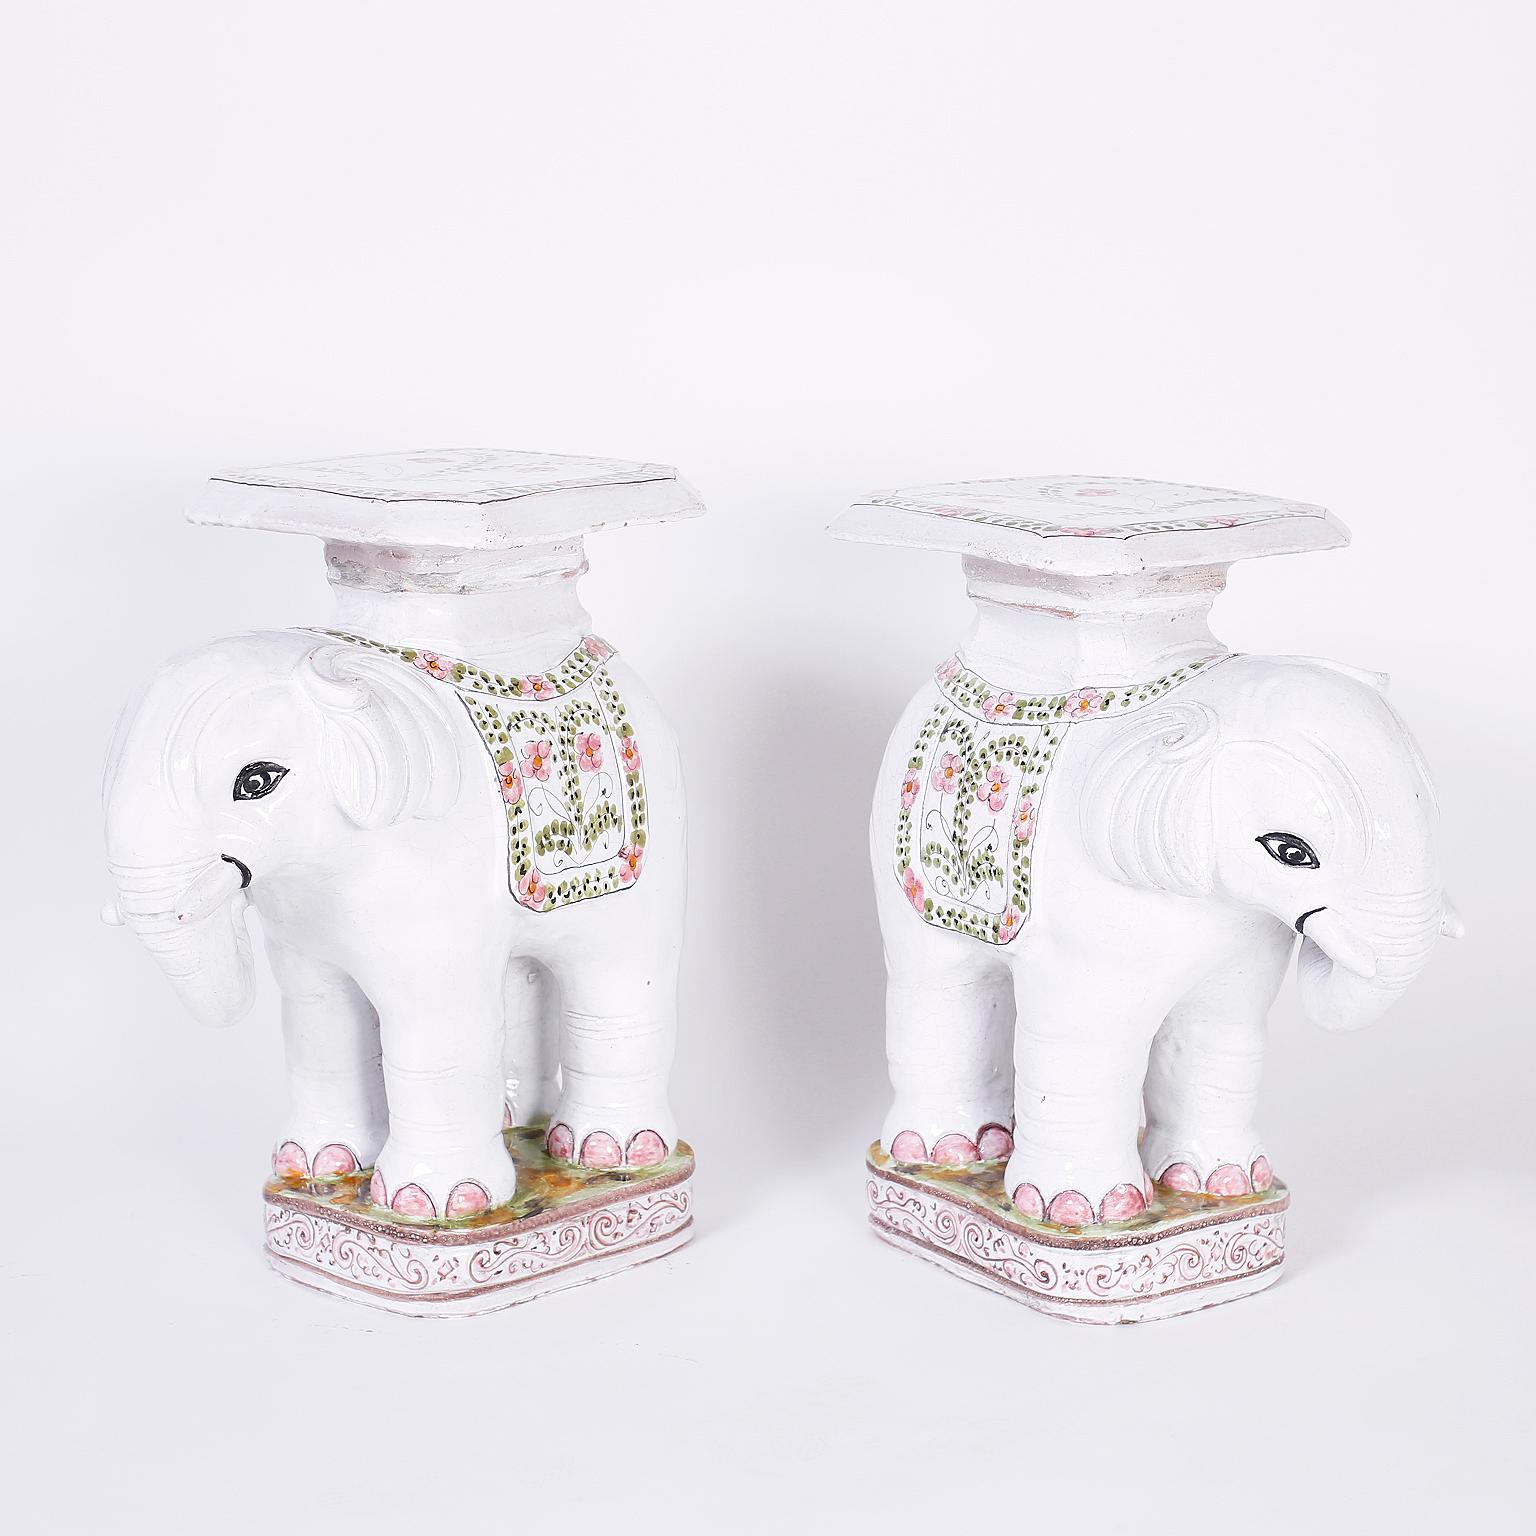 Pair of terracotta elephant tables or stands with a white glaze decorated with happy floral designs.